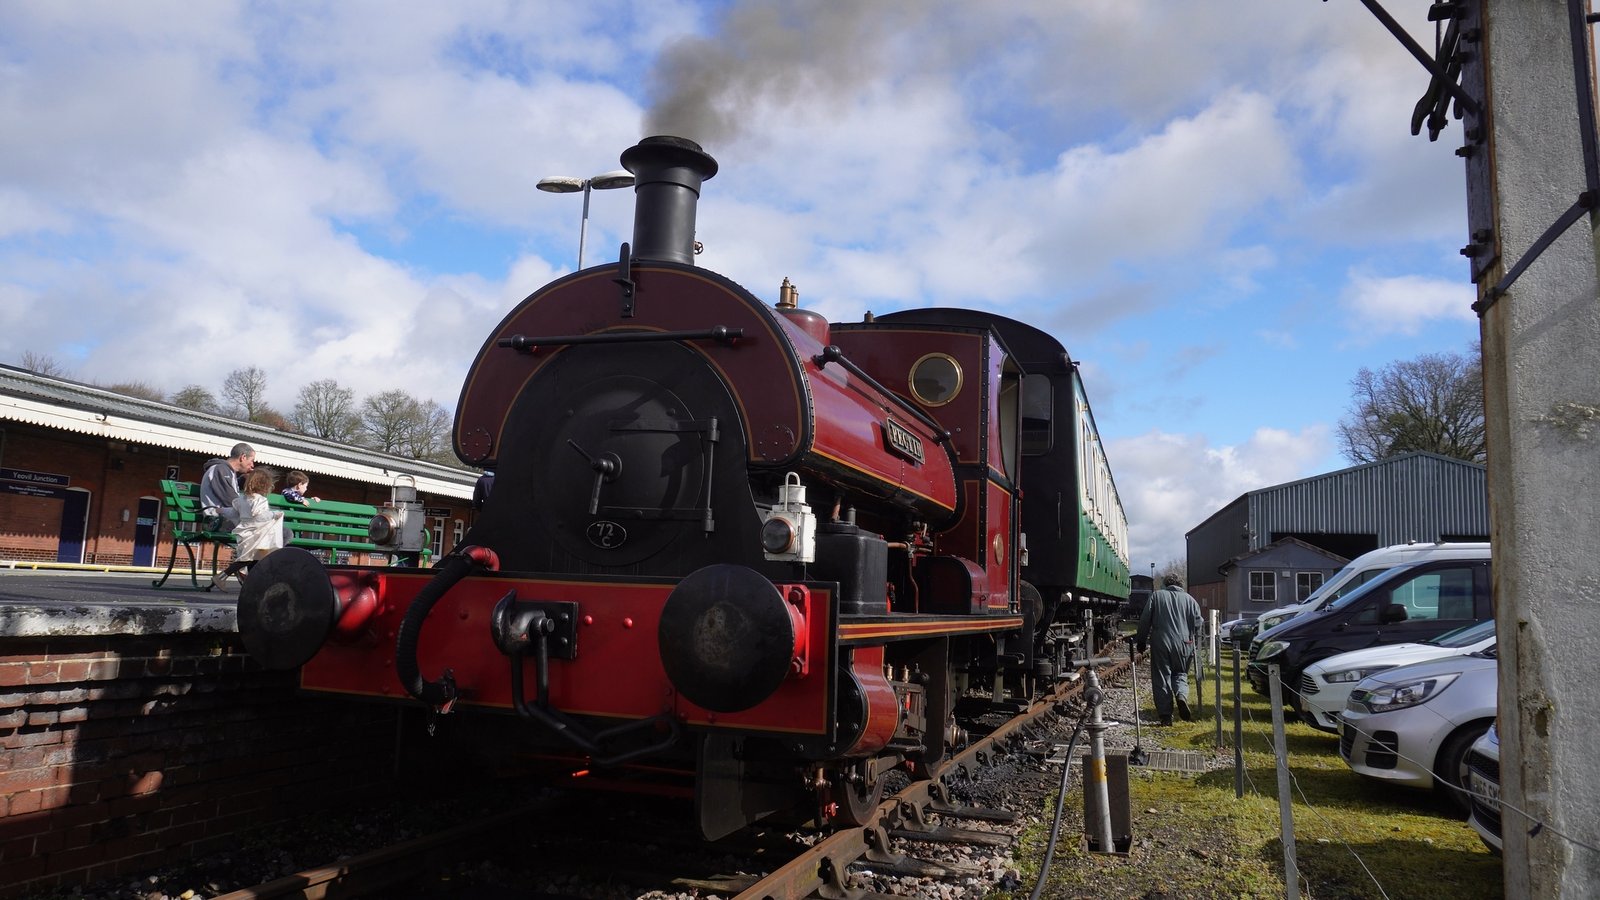 You are currently viewing Filming Steam at the Yeovil Railway Centre 